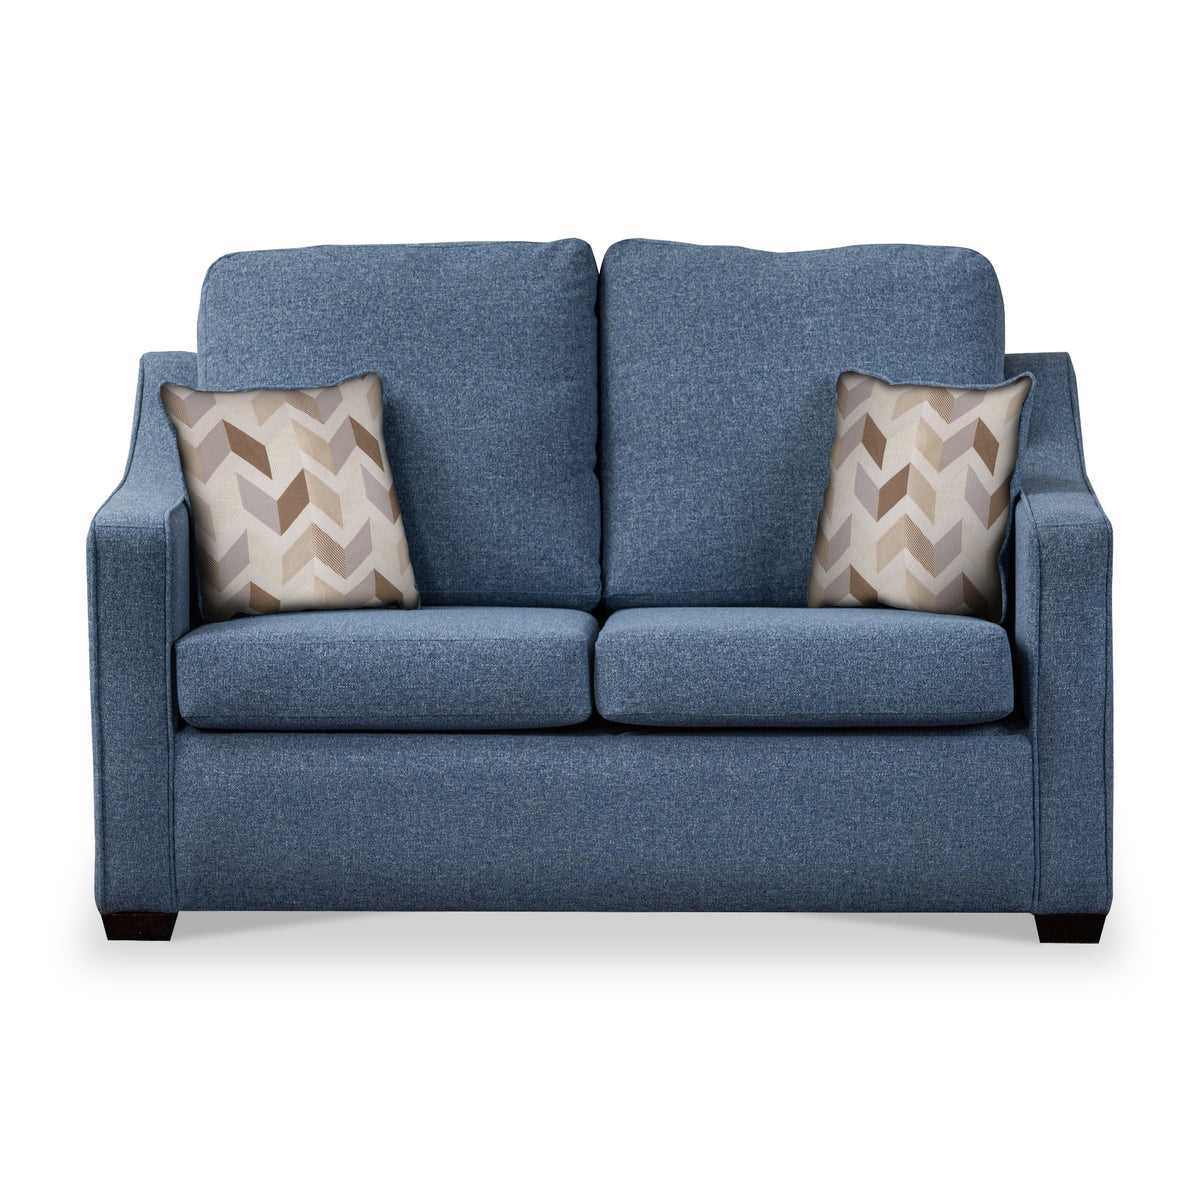 Charlcote Denim Faux Linen 2 Seater Sofabed with Oatmeal Scatter Cushions from Roseland Furniture